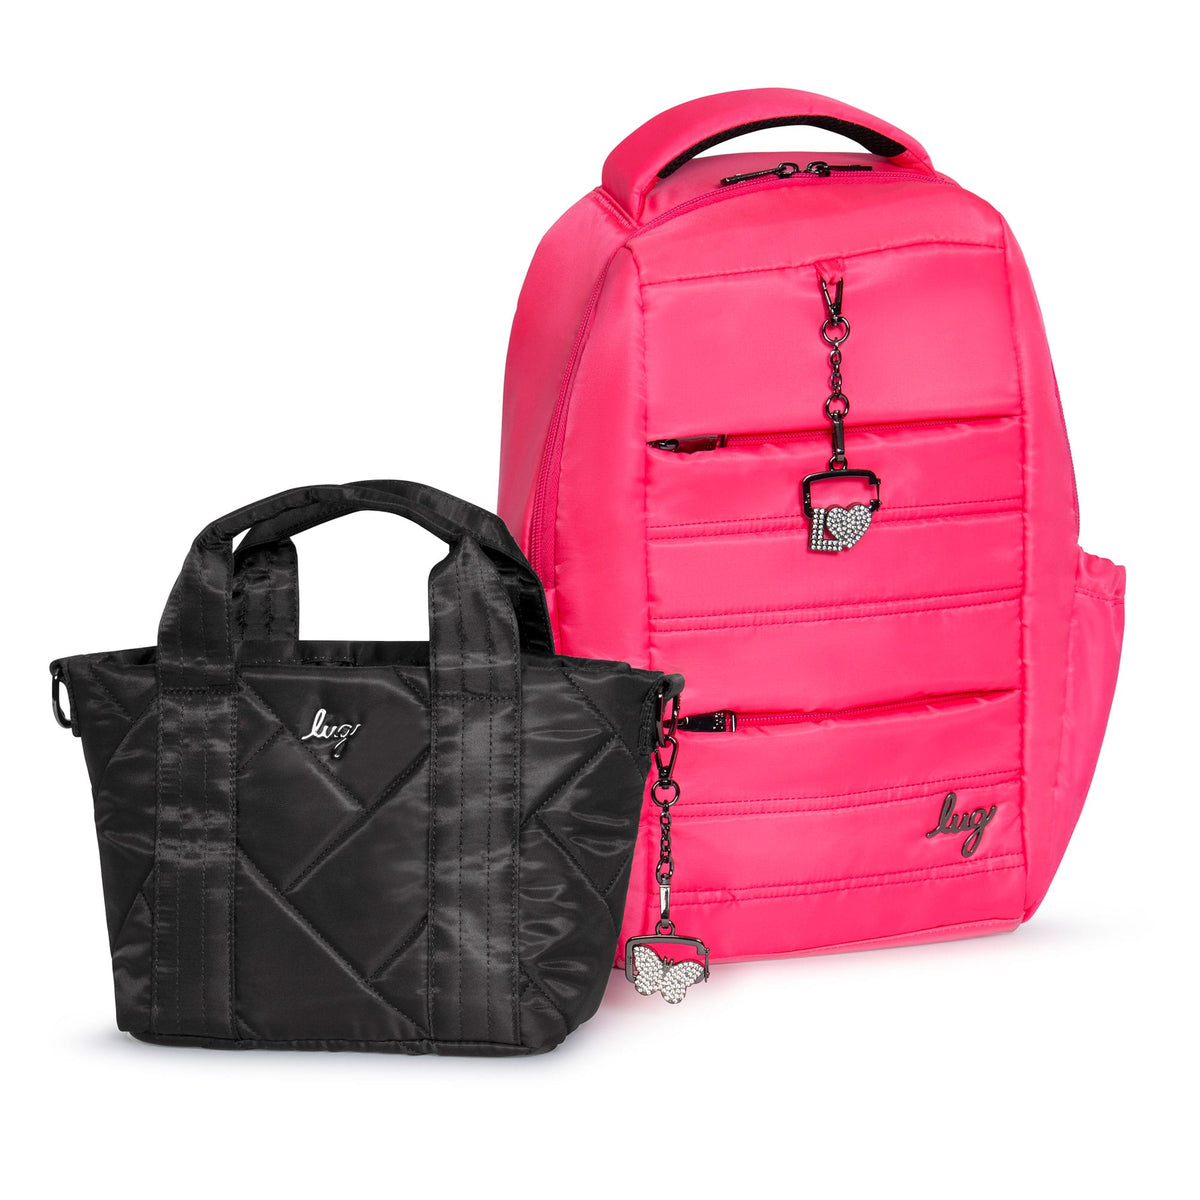 Victoria's Secret - Pack these bags & glow: FREE sparkle carryall